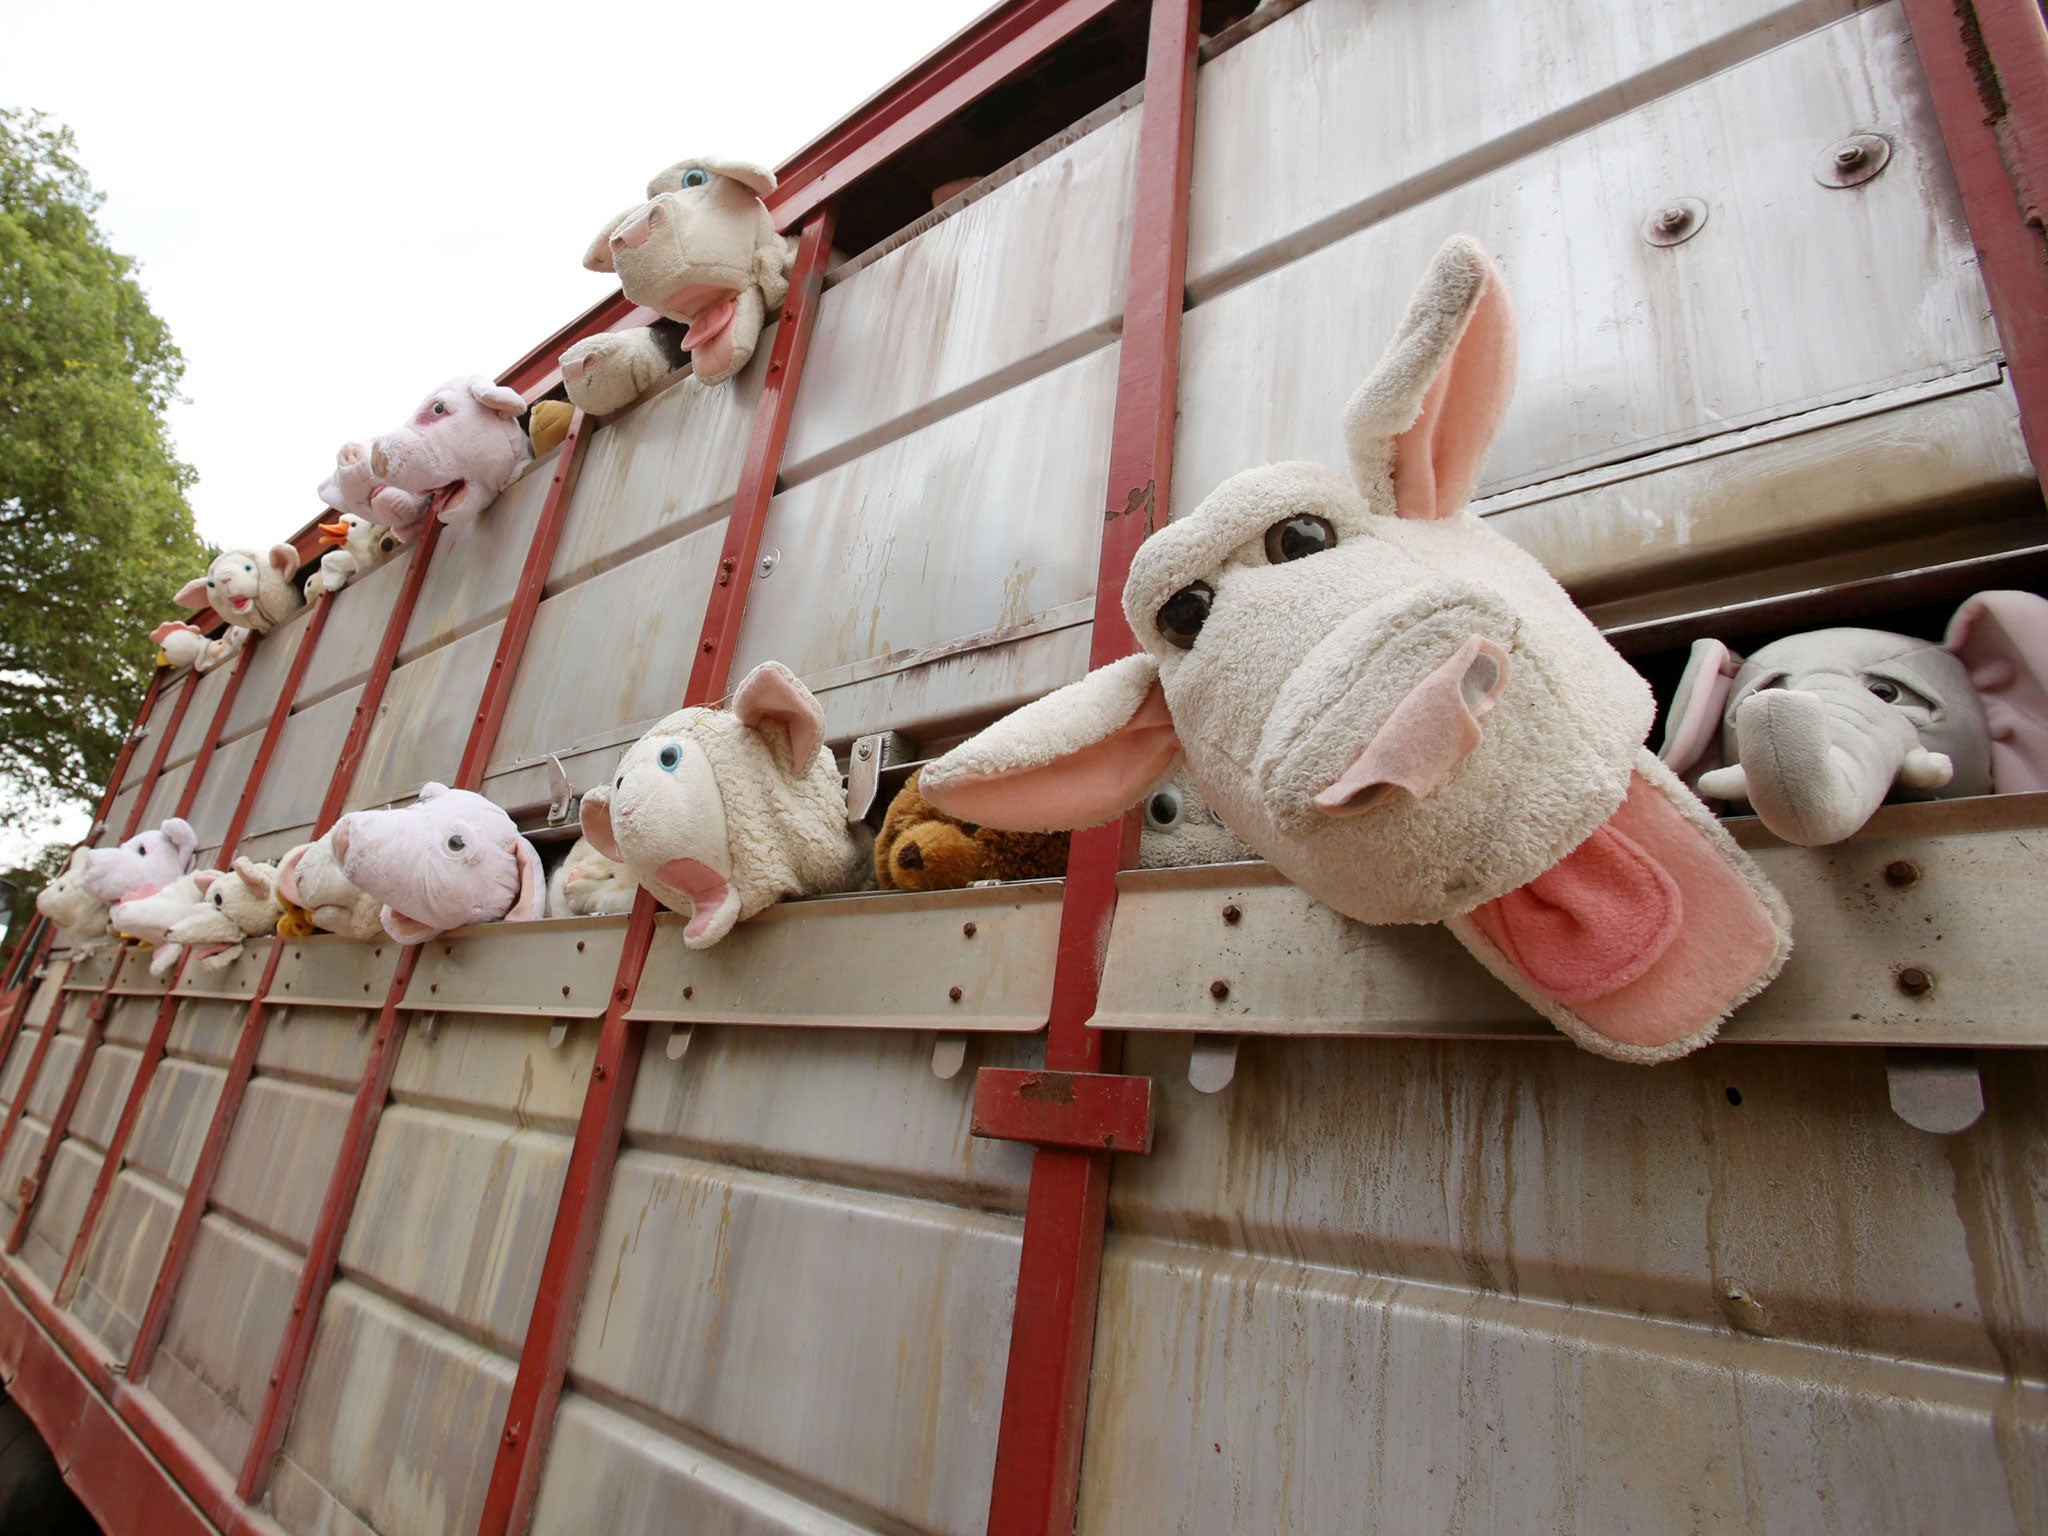 A sculpture by Banksy, entitled 'The Sirens of the Lambs', depicting a truck full of shrieking cuddly animals being driven to slaughter, drives around the Glastonbury Festival, at Worthy Farm in Somerset